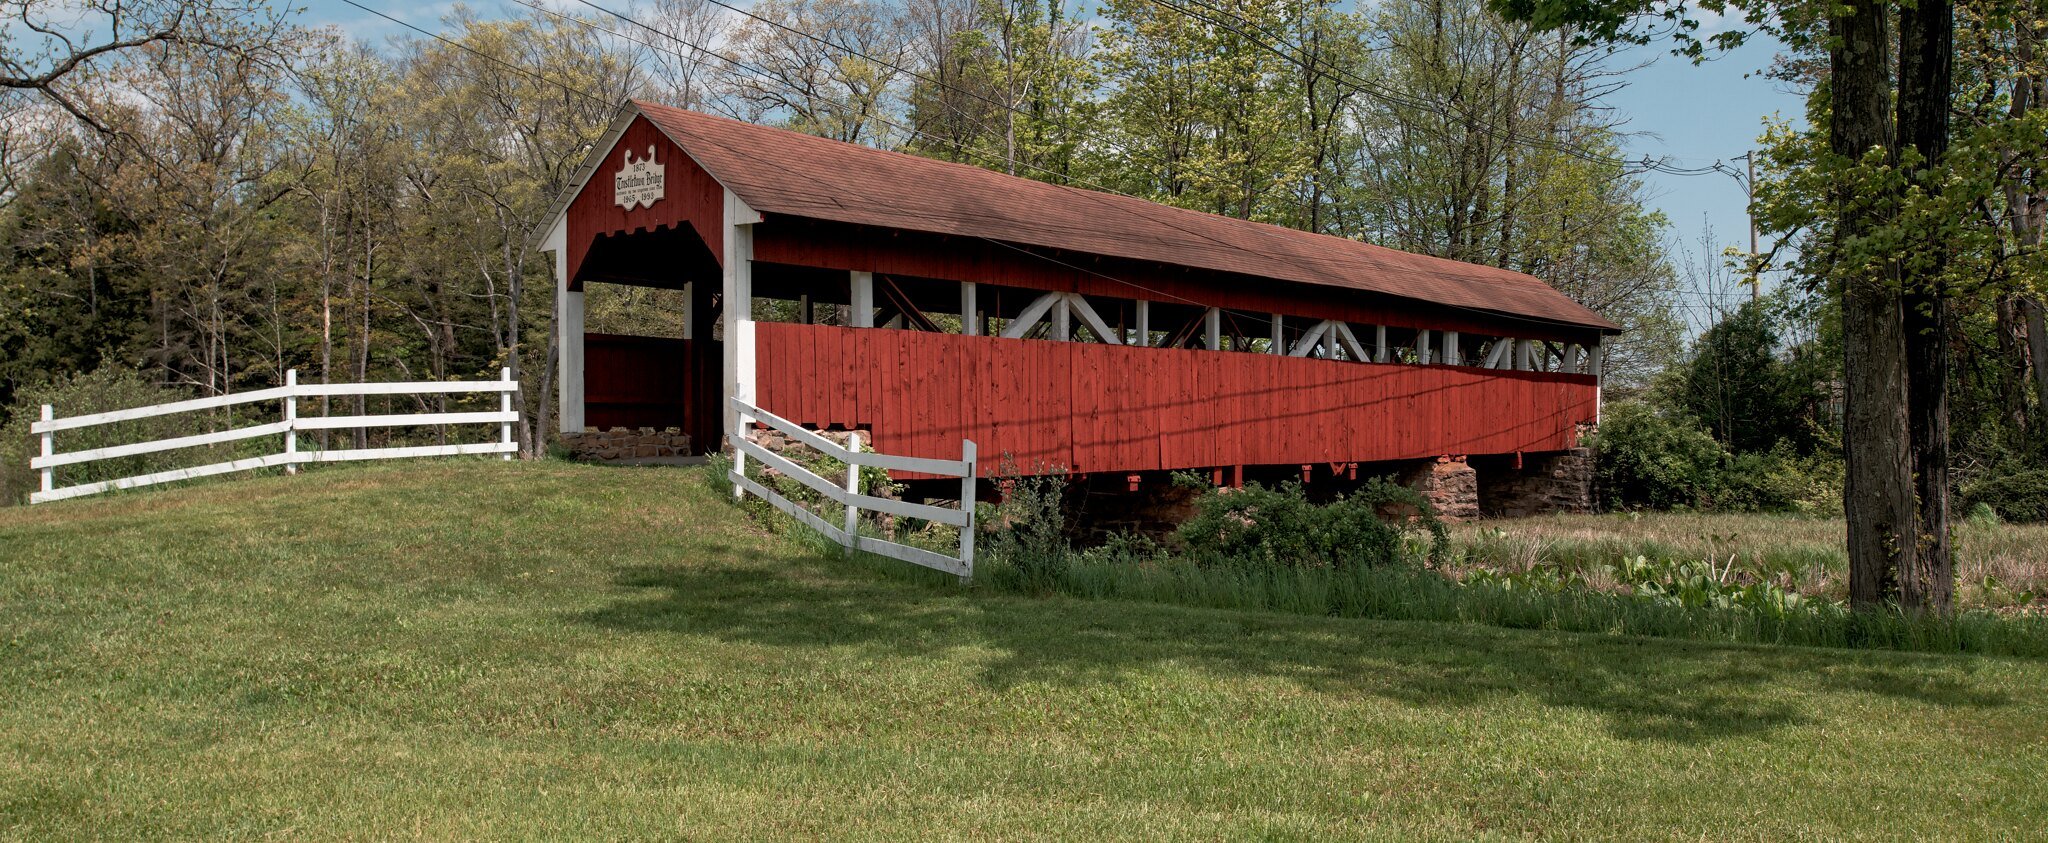  Trostletown Covered Bridge in Stoystown, Somerset County, PA.  Built in 1873. 